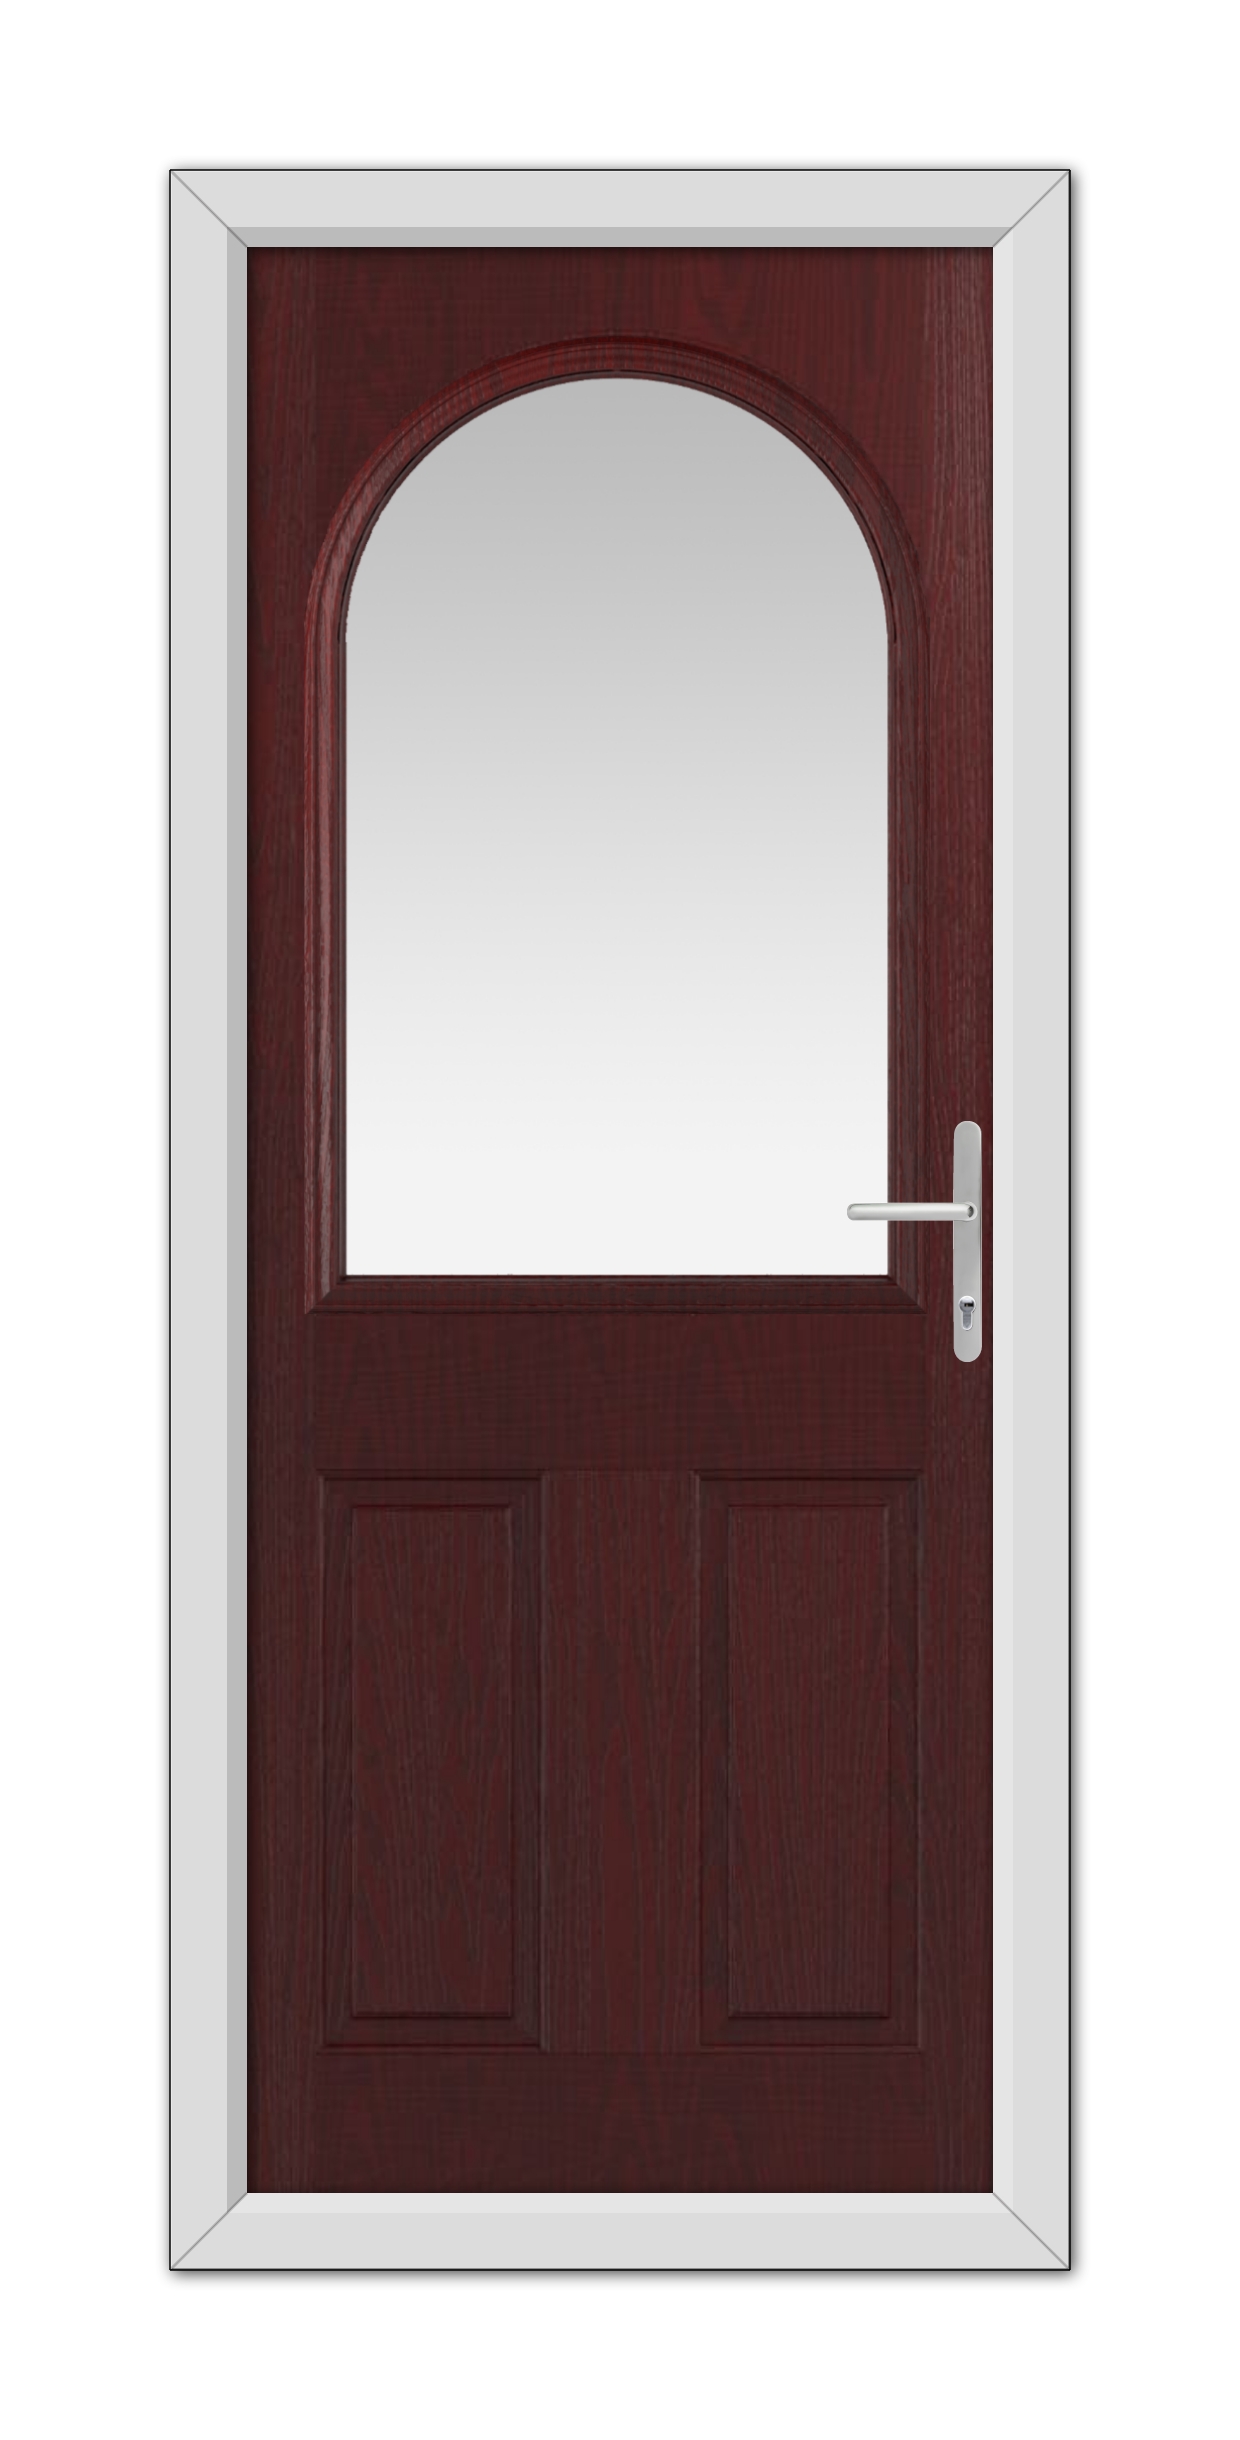 Rosewood Grafton Composite Door 48mm Timber Core with an arched window at the top, fitted with a white handle, set within a white door frame.